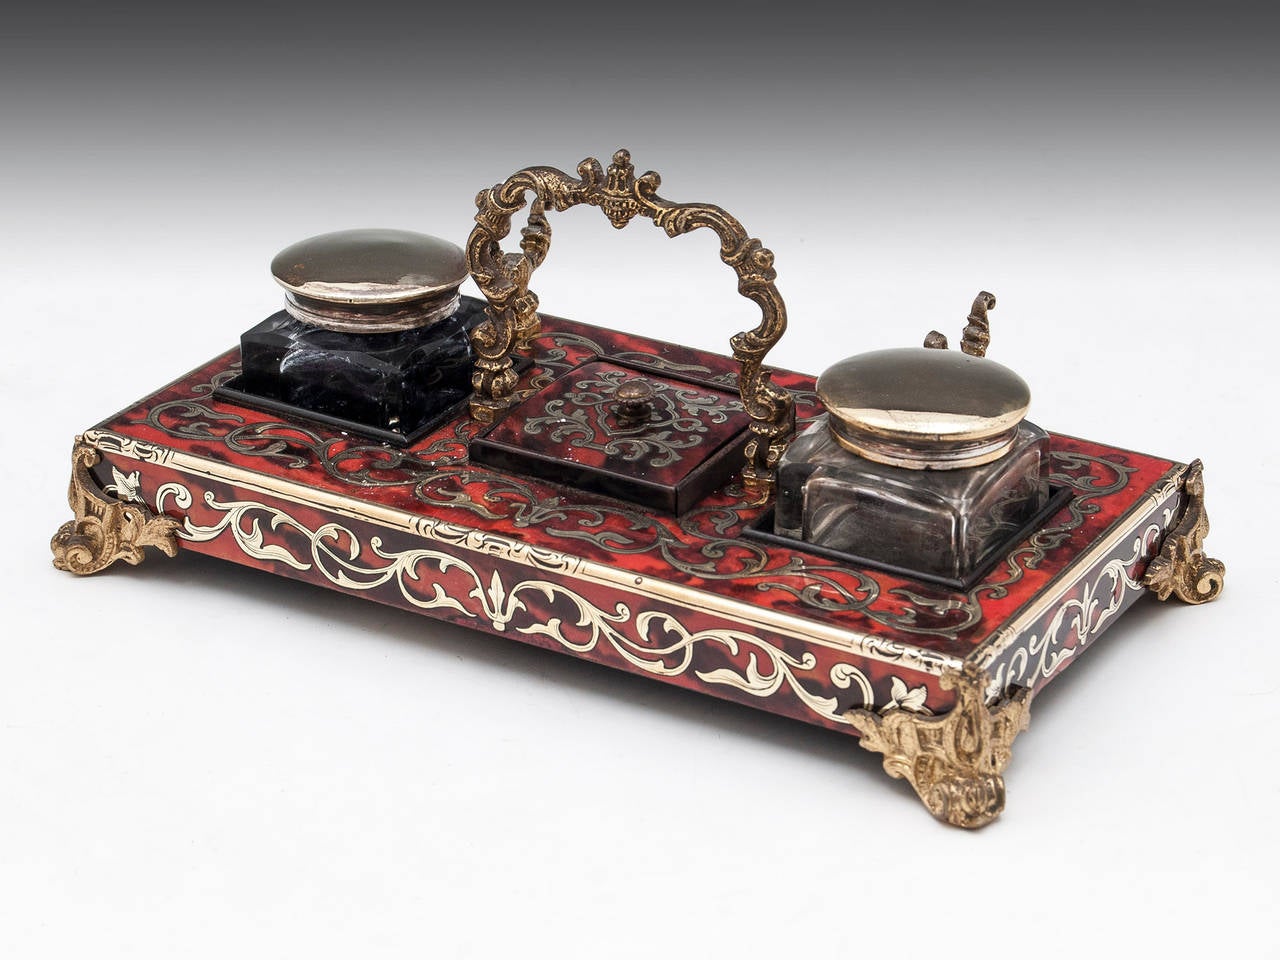 Boulle Inkstand with decorative gilded Ormolo brass feet, pen holder and carrying handle. To the centre is a small Boulle lidded compartment, either side of this it has two brass screw top inkwells. 

The 